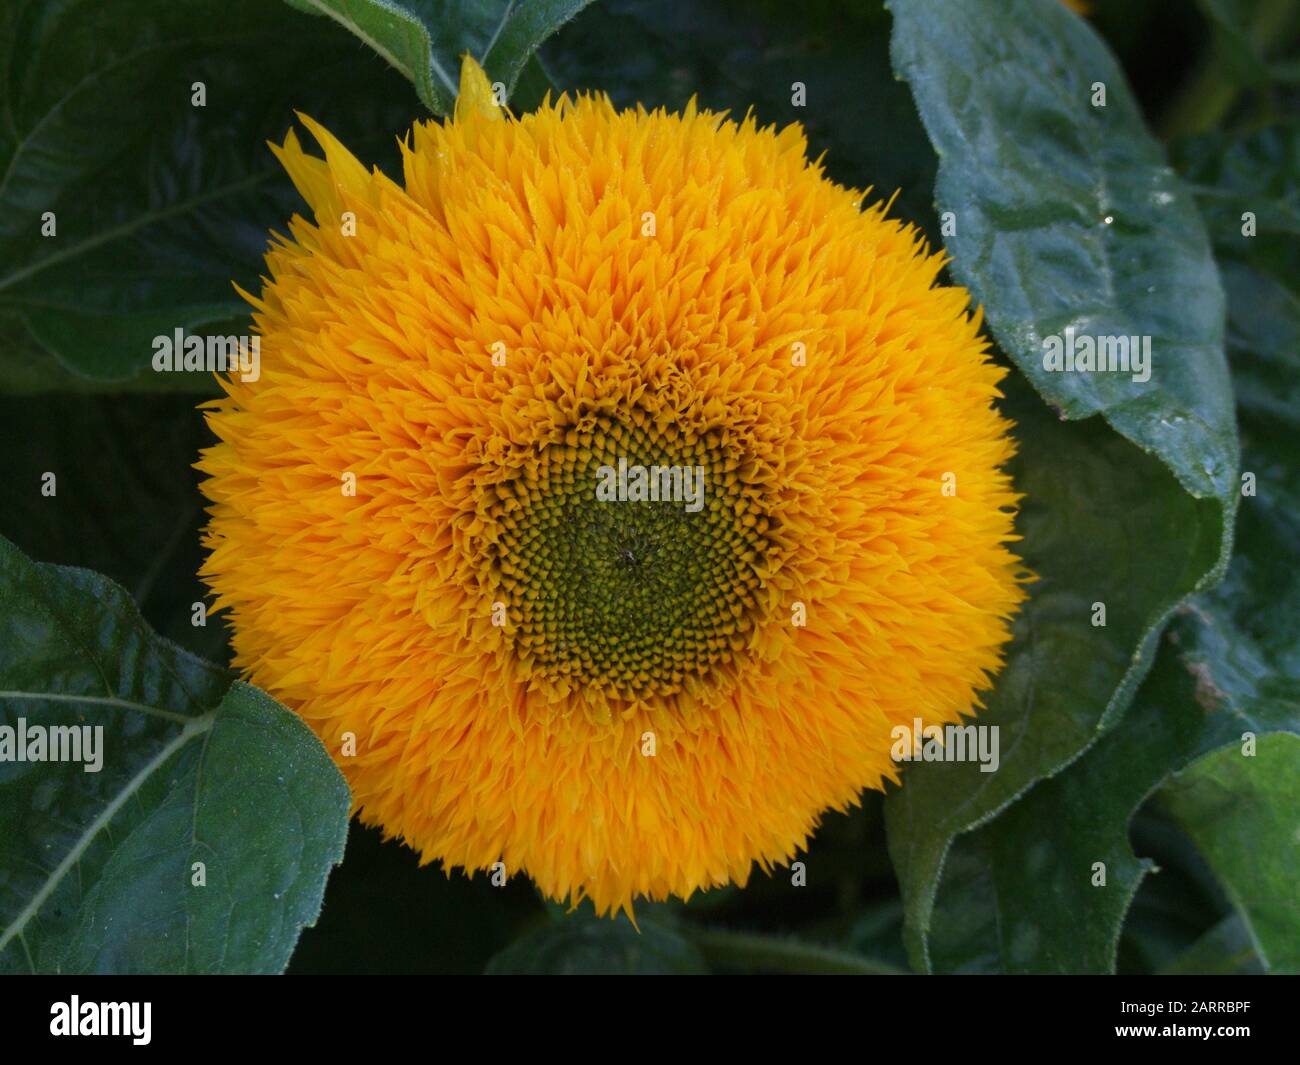 Sunflower. Helianthus annuus. Name Teddy Bear. Close up of a large round flower with small orange petals. Stock Photo